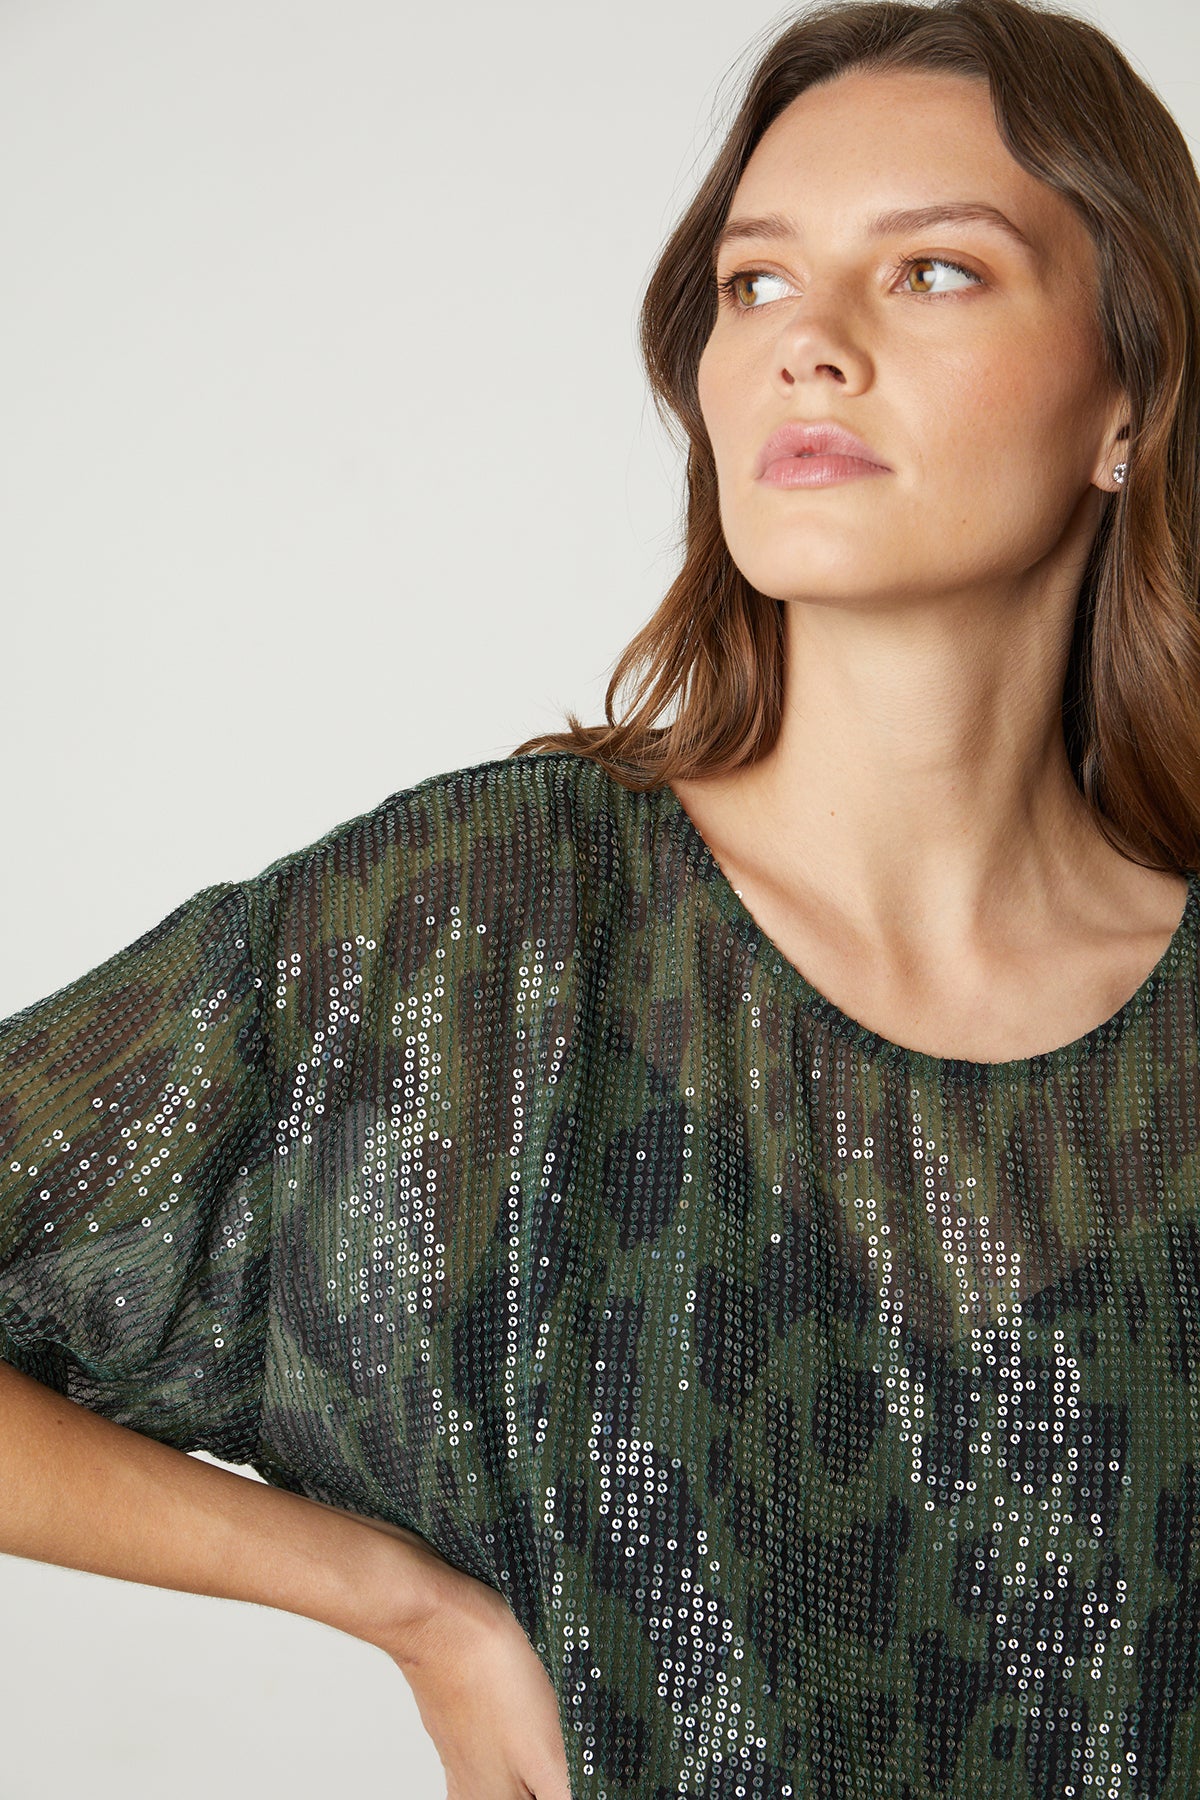   Alessa Printed Sequin Top in airbrush muted green and black mottled pattern front detail 